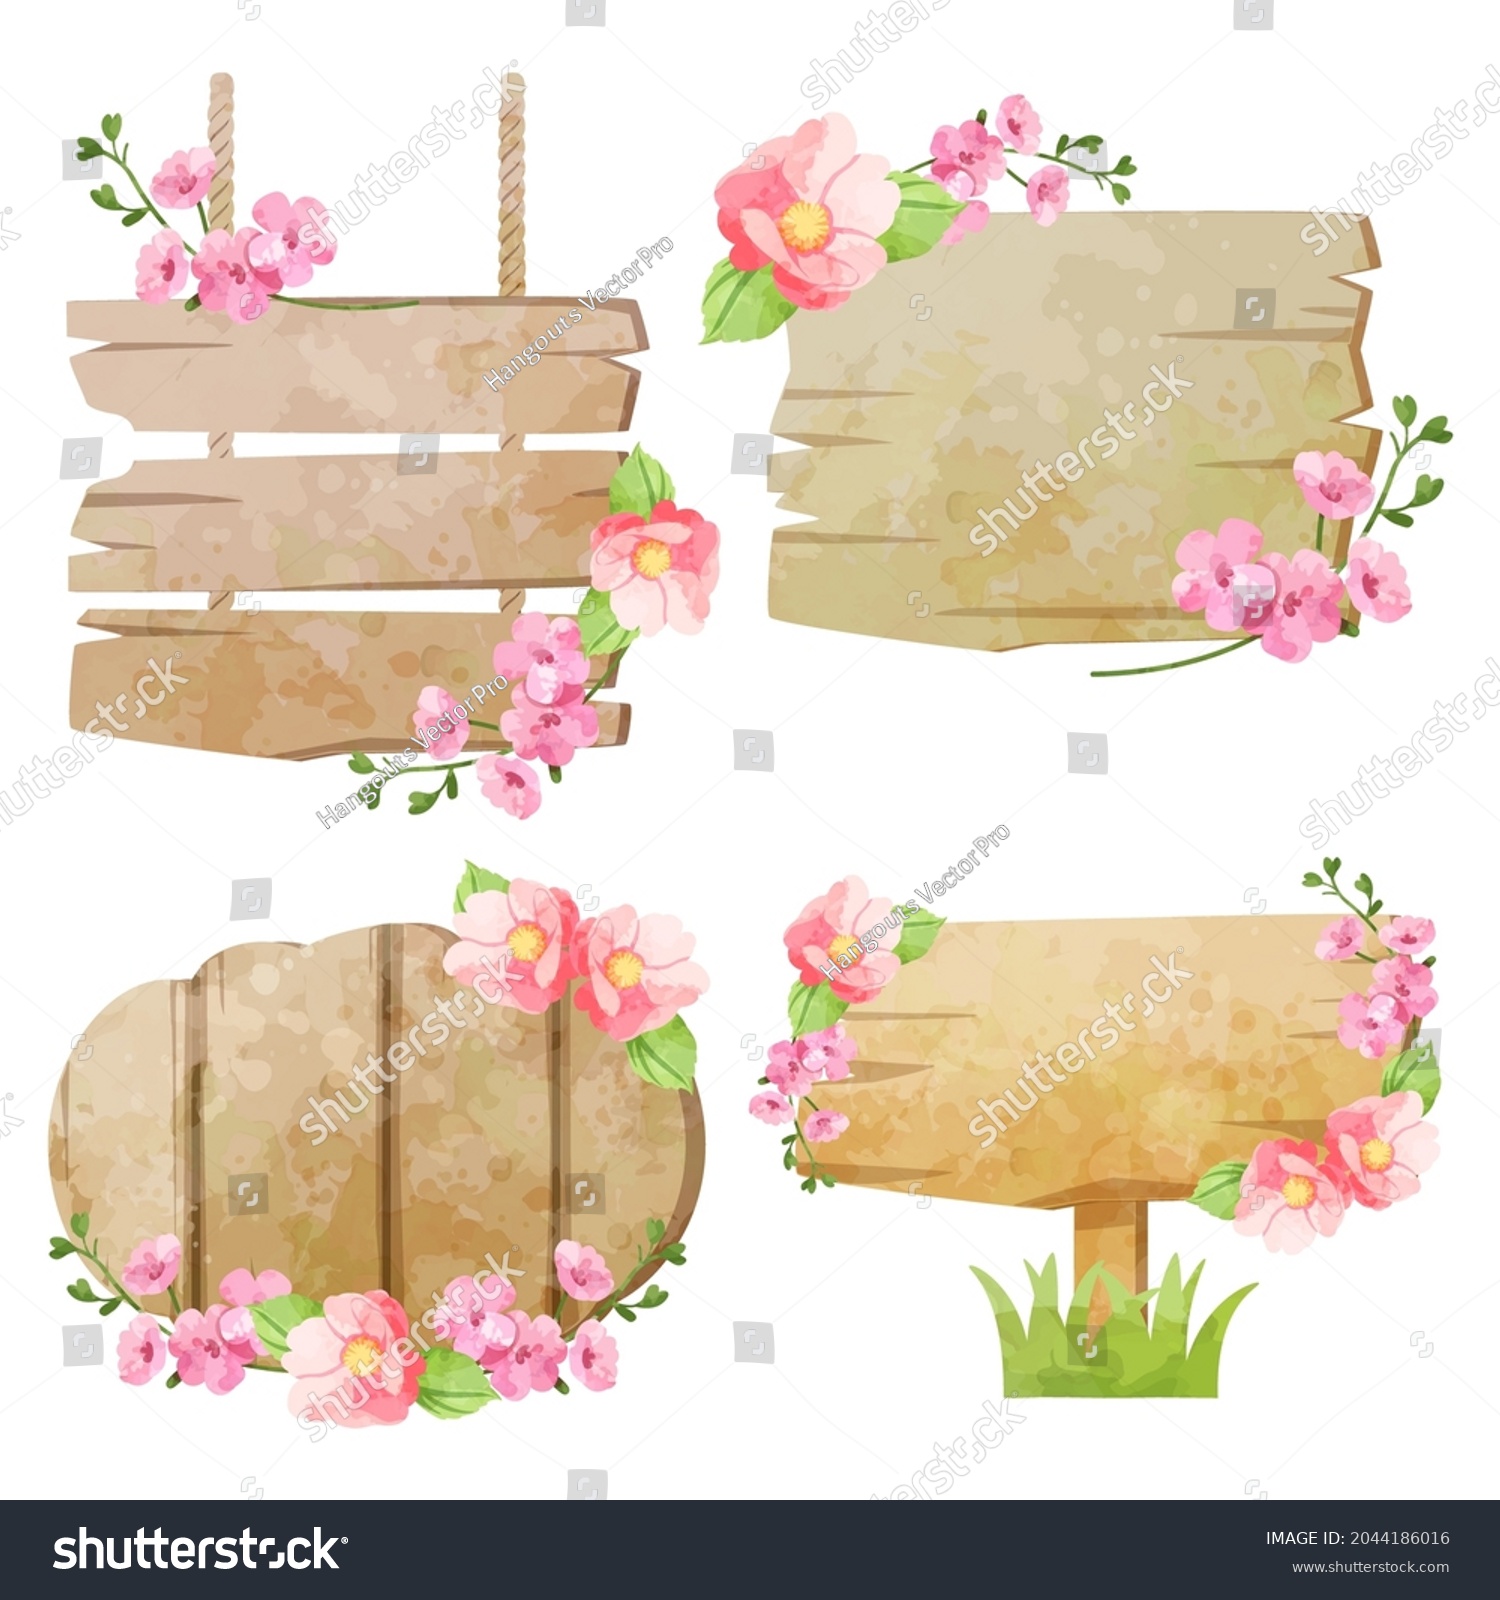 Vector Wooden Sign Board Flower Plant Stock Vector (Royalty Free ...